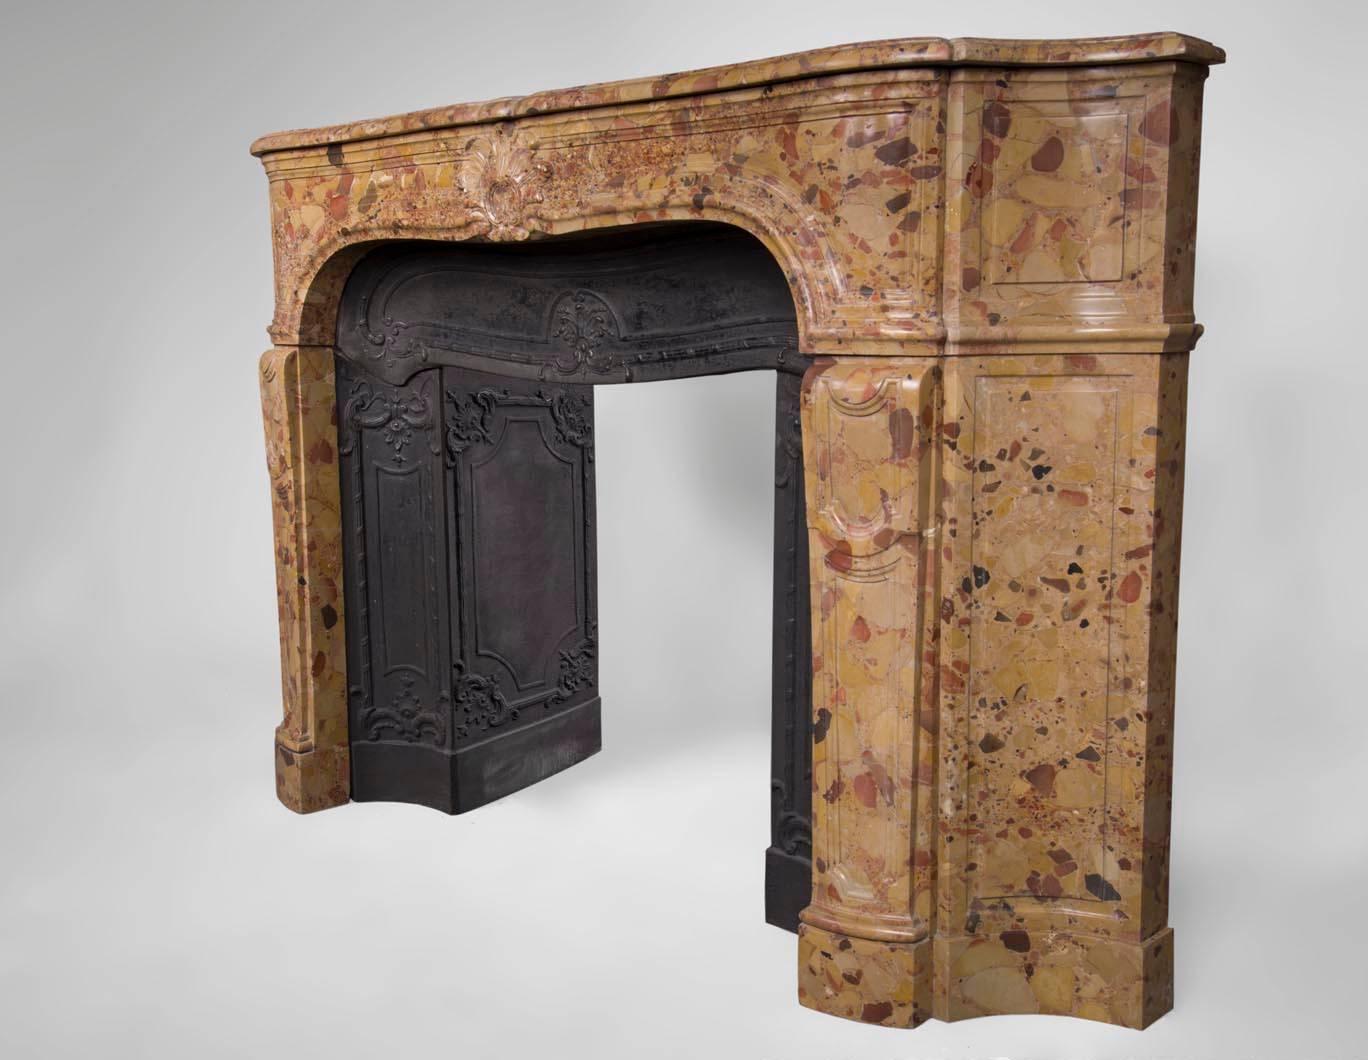 Regence Style Fireplace in Aleppo Breccia Marble, Early 19th Century In Good Condition For Sale In Saint Ouen, FR